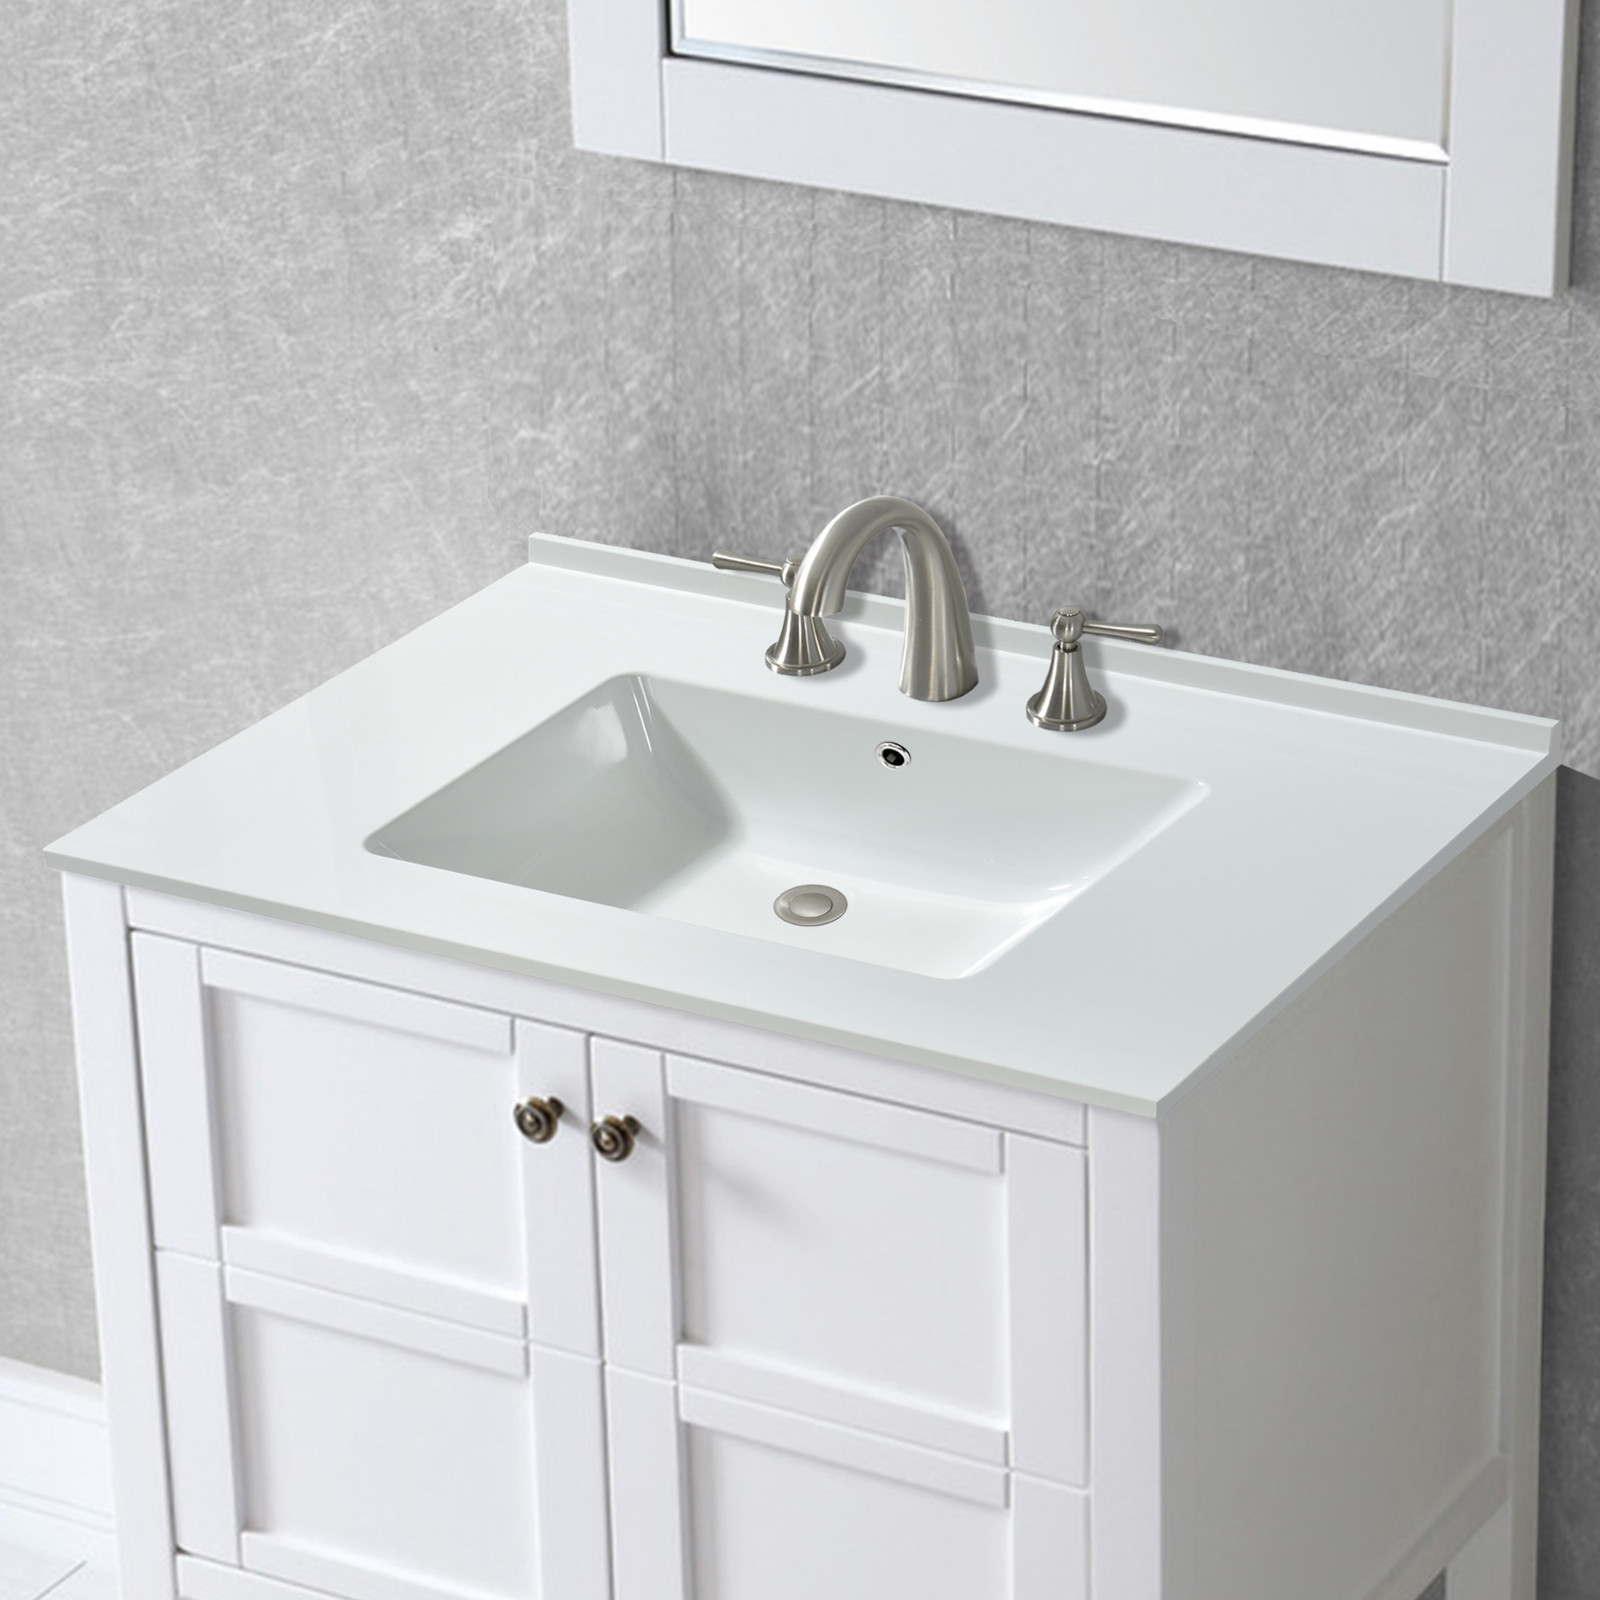  WOODBRIDGE VT3122-1000 Solid Surface Vanity Top with with Intergrated Sink and 3 Faucet Holes for 4-Inch Centerset Faucet, 31